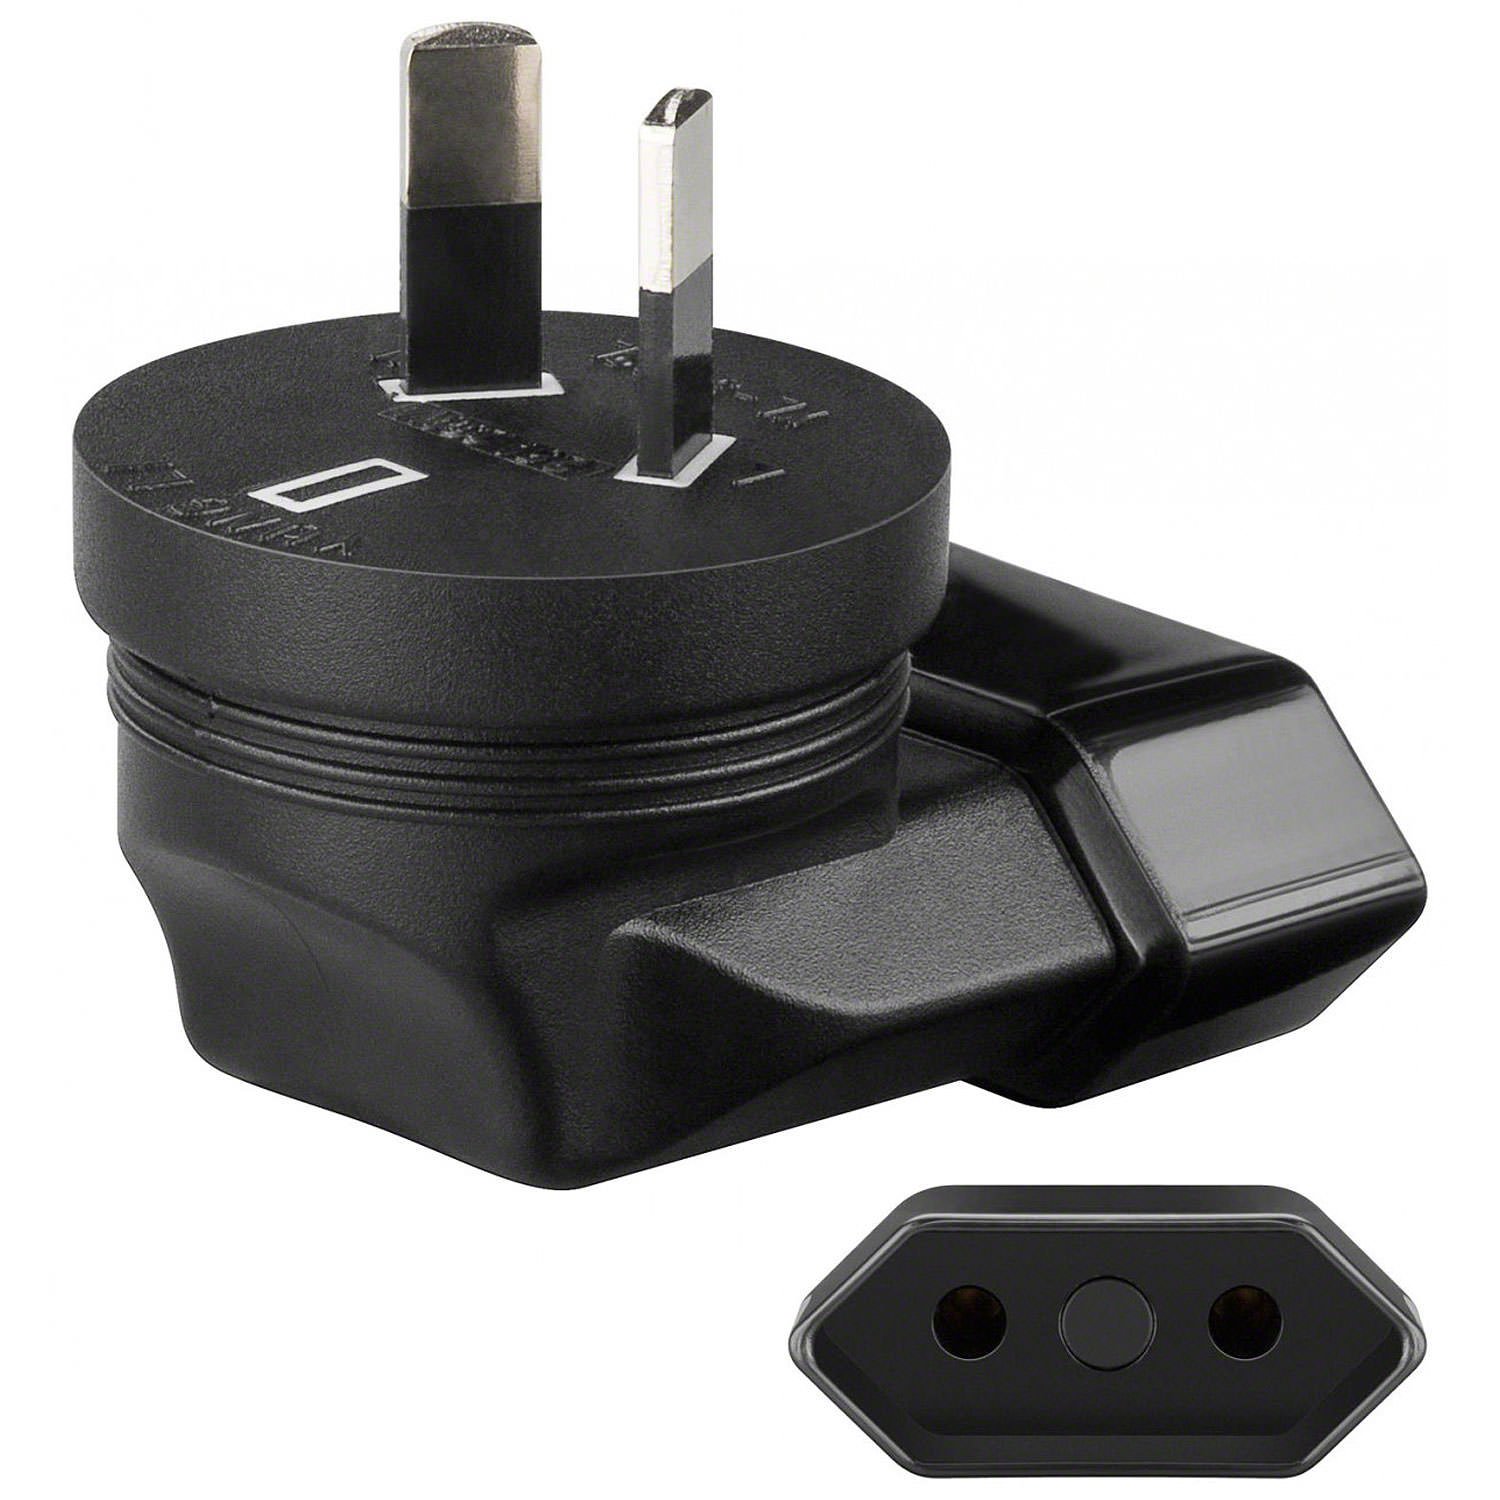 Plug Adapter for Australia with Jack by Erzgebirge-Palast